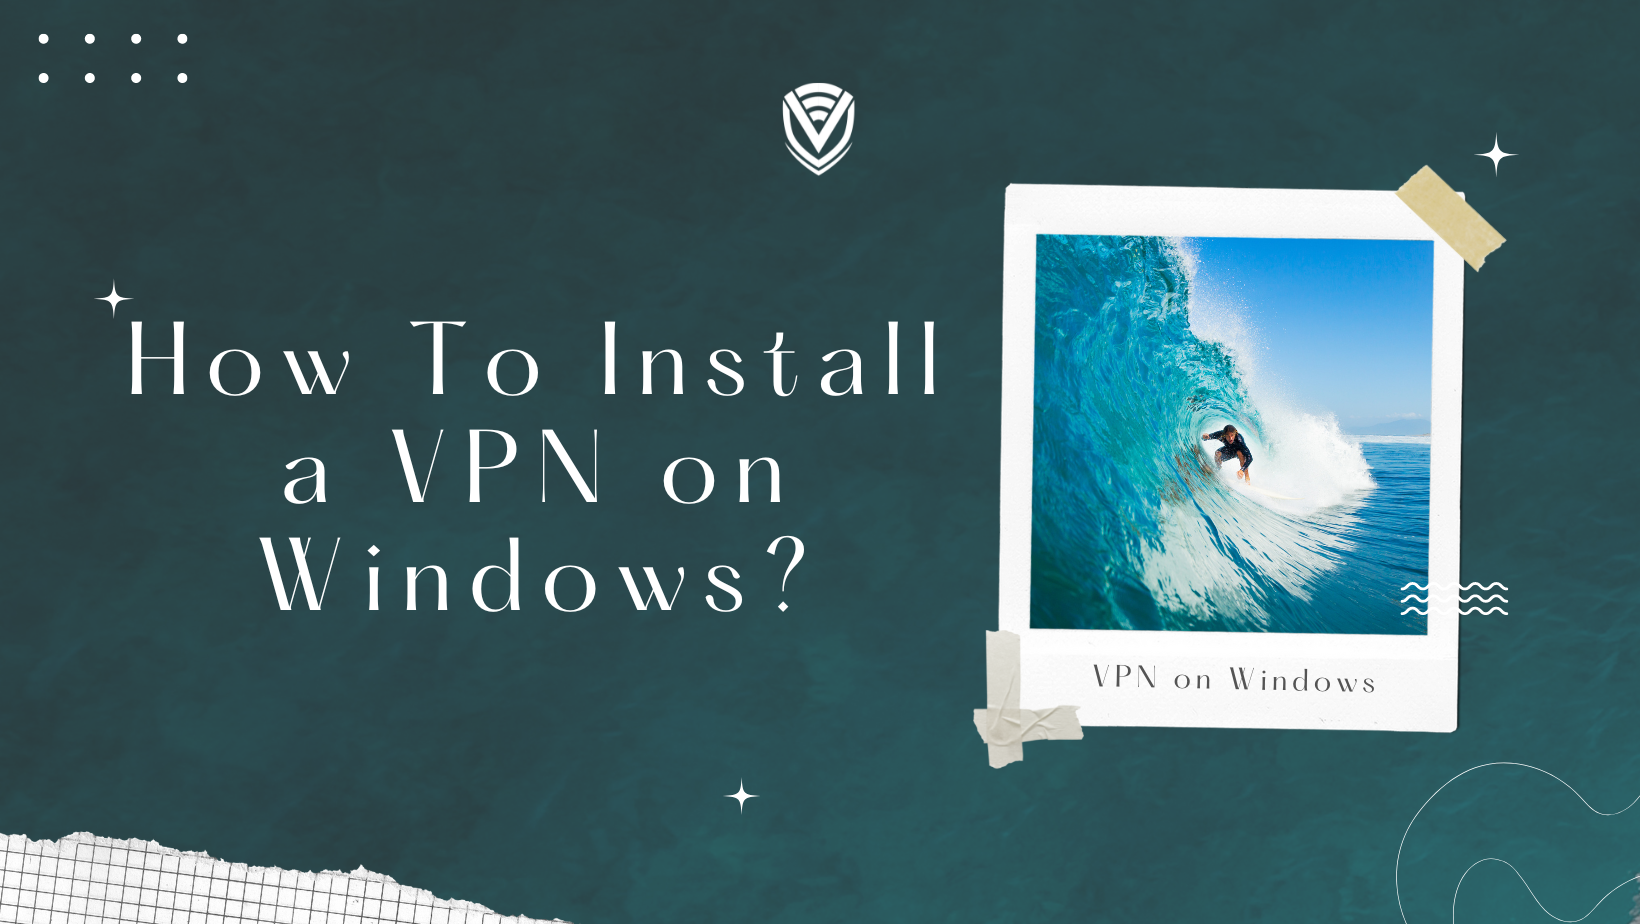 How To Install a VPN on Windows